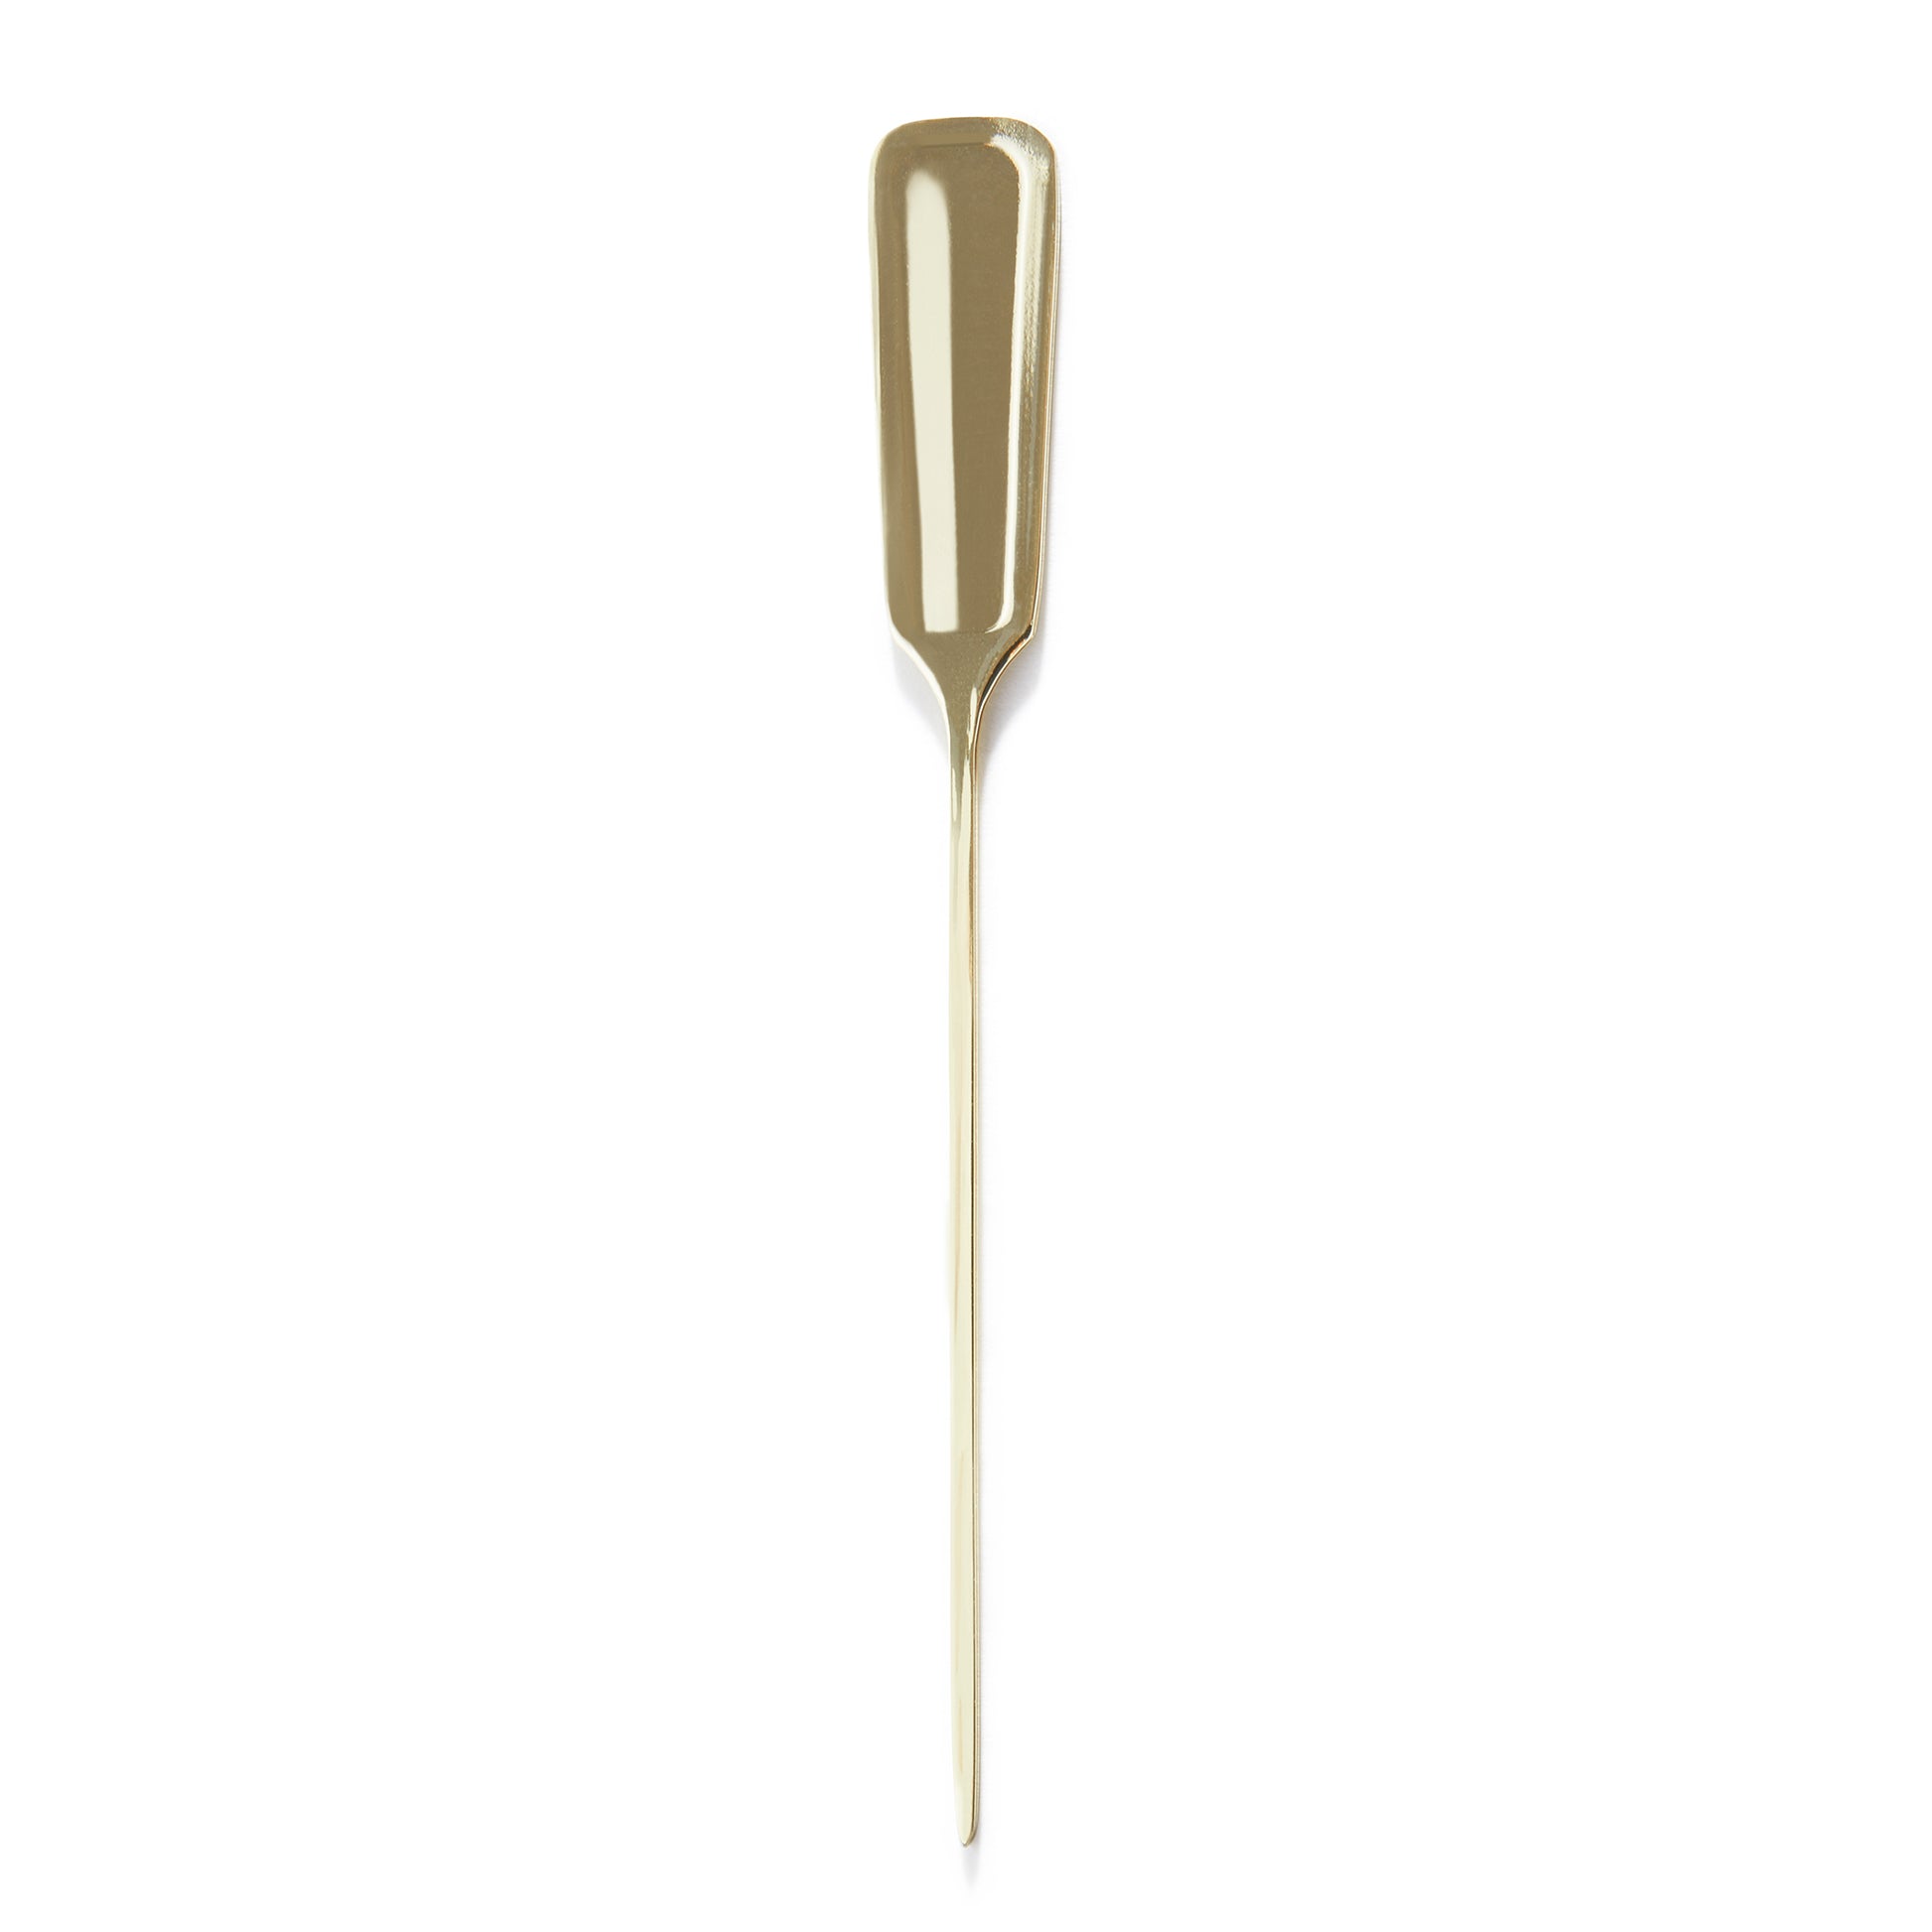 BROMLEY™ COCKTAIL PICK / GOLD-PLATED / PACK OF 12